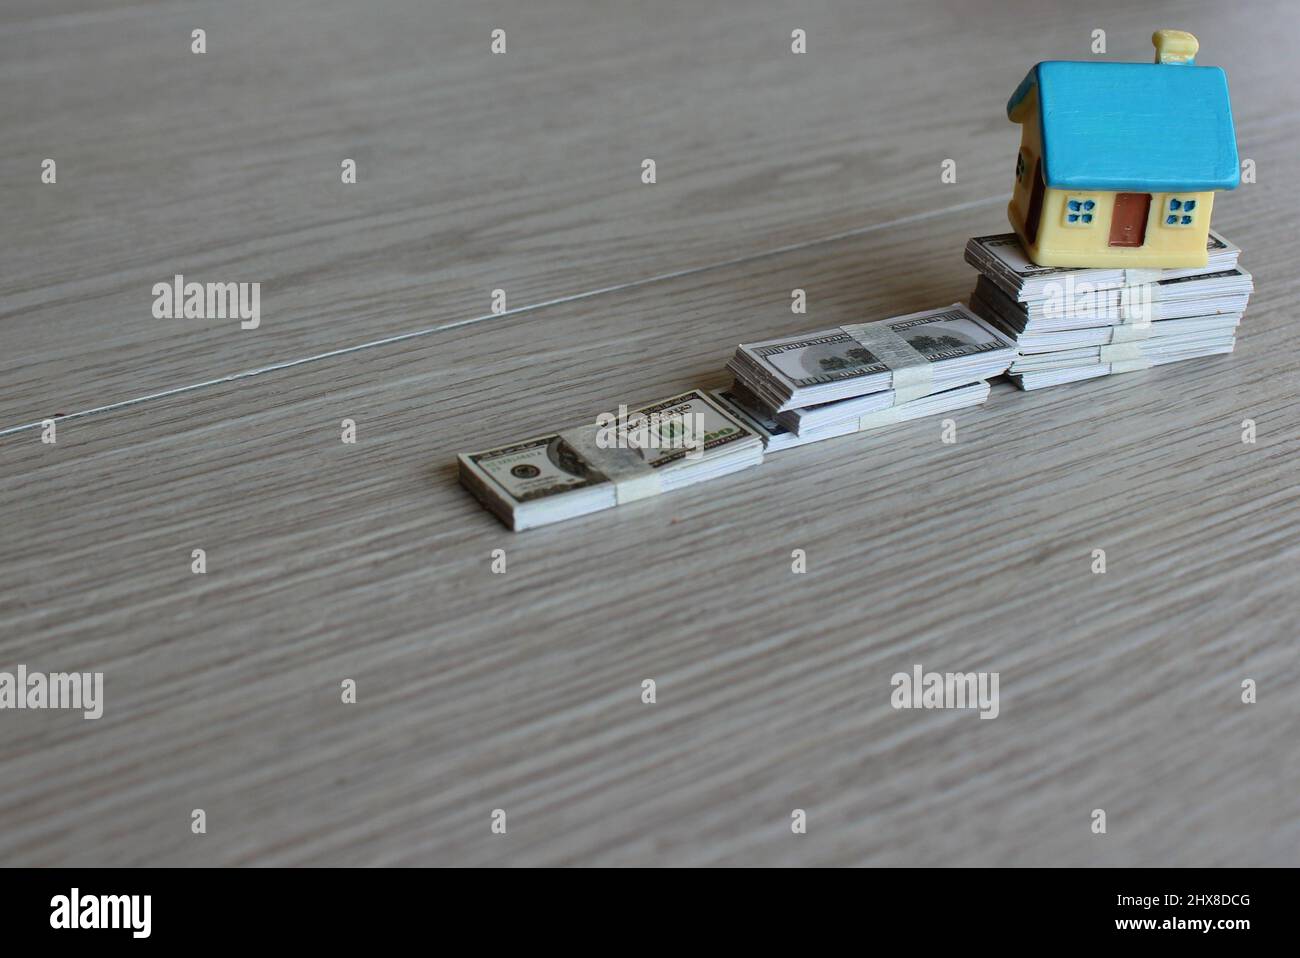 House prices rising, property investment concept. Toy house on top of stack of money. Stock Photo